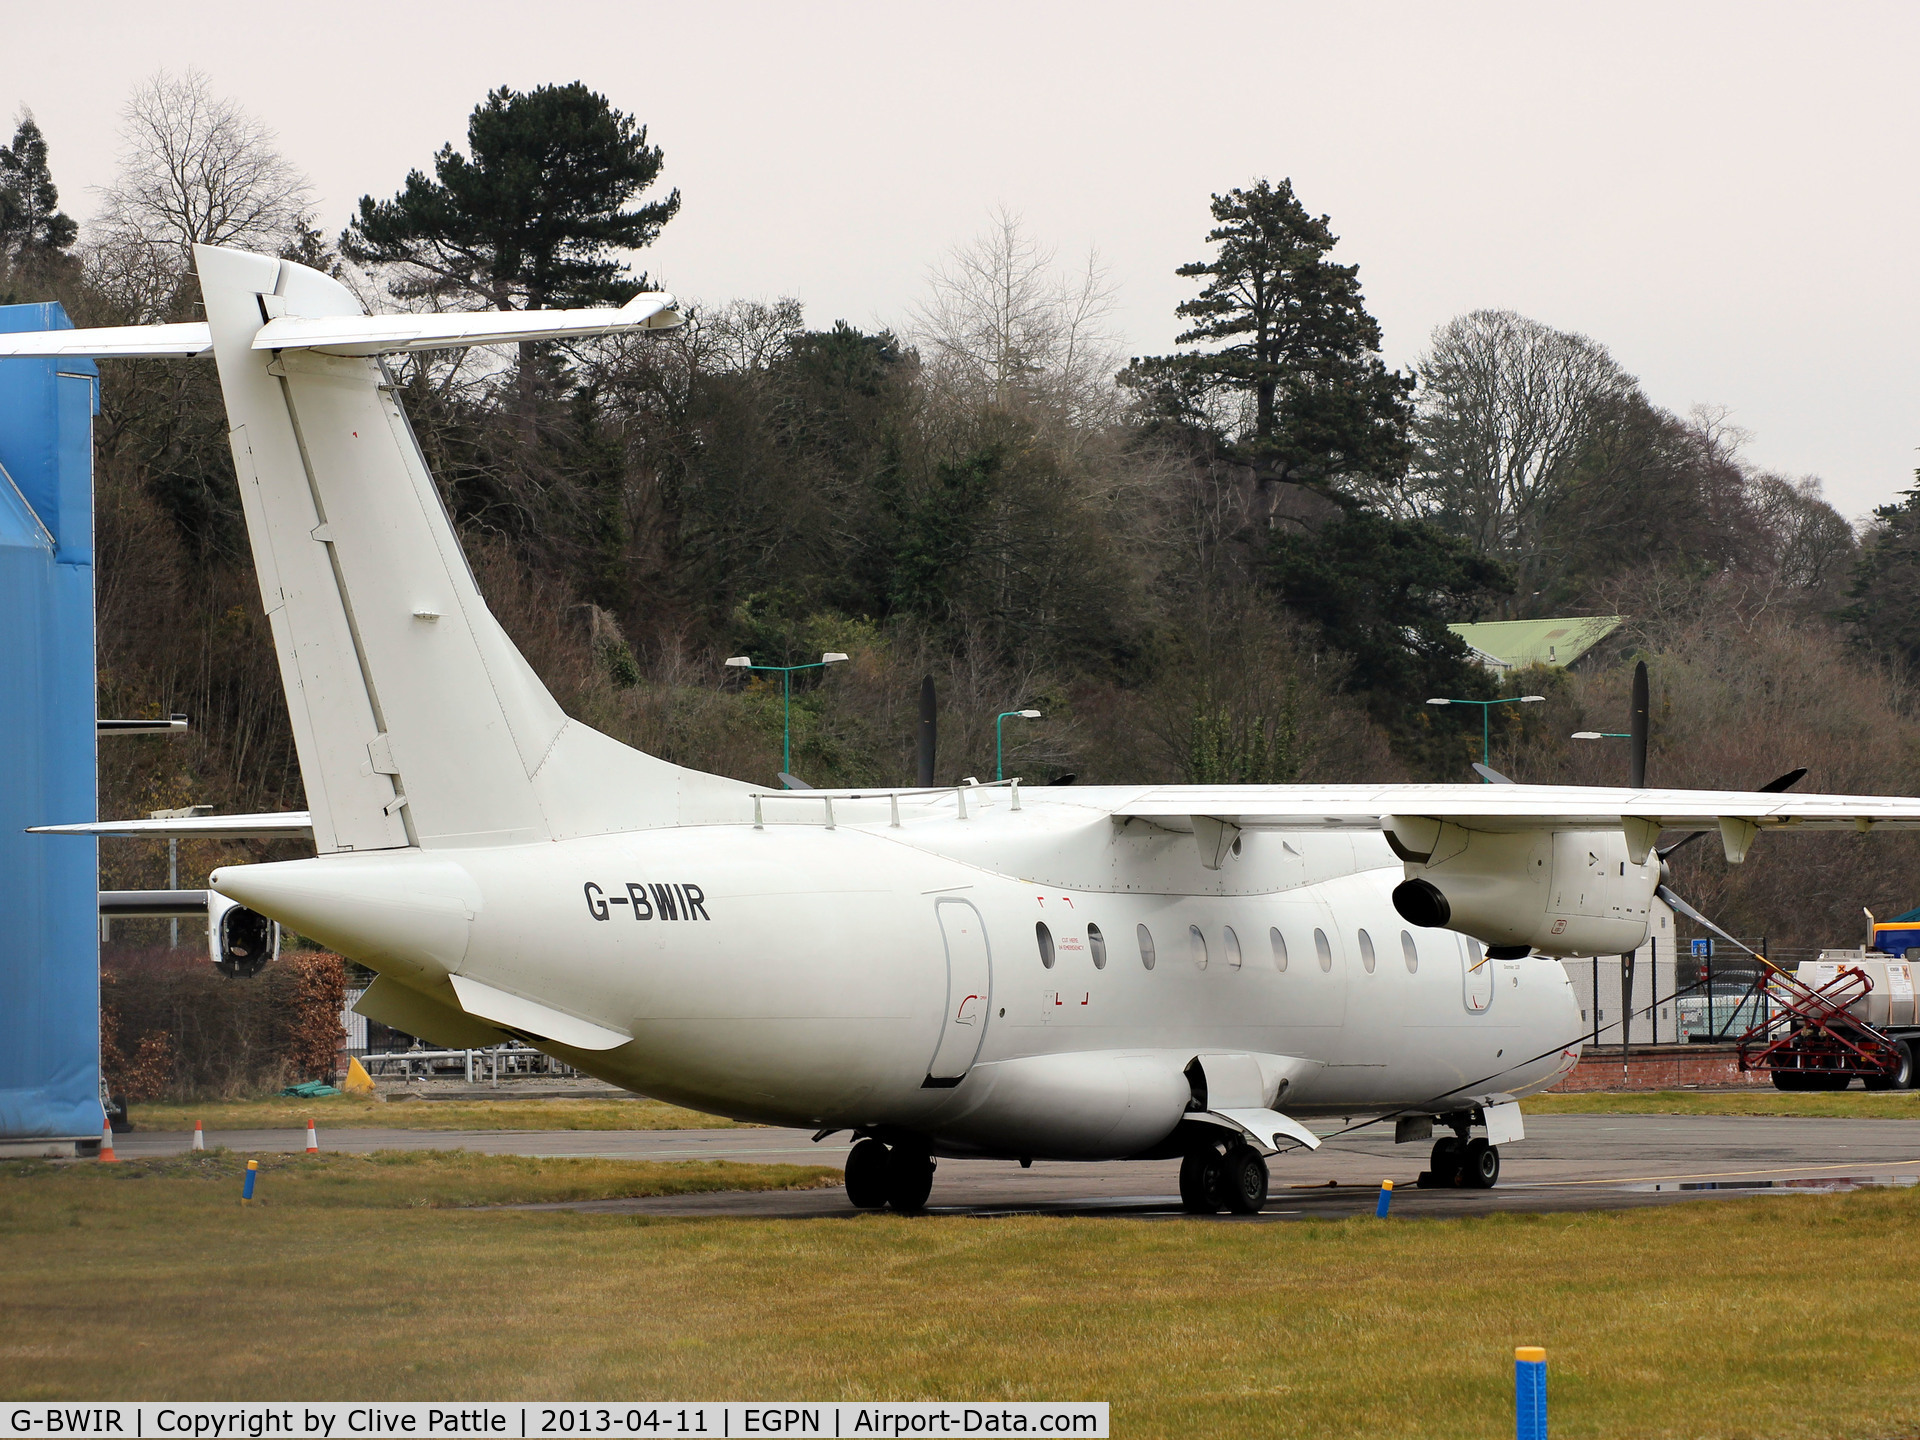 G-BWIR, 1995 Dornier 328-100 C/N 3023, Parked up at the Flybe engineering facility at Dundee airport